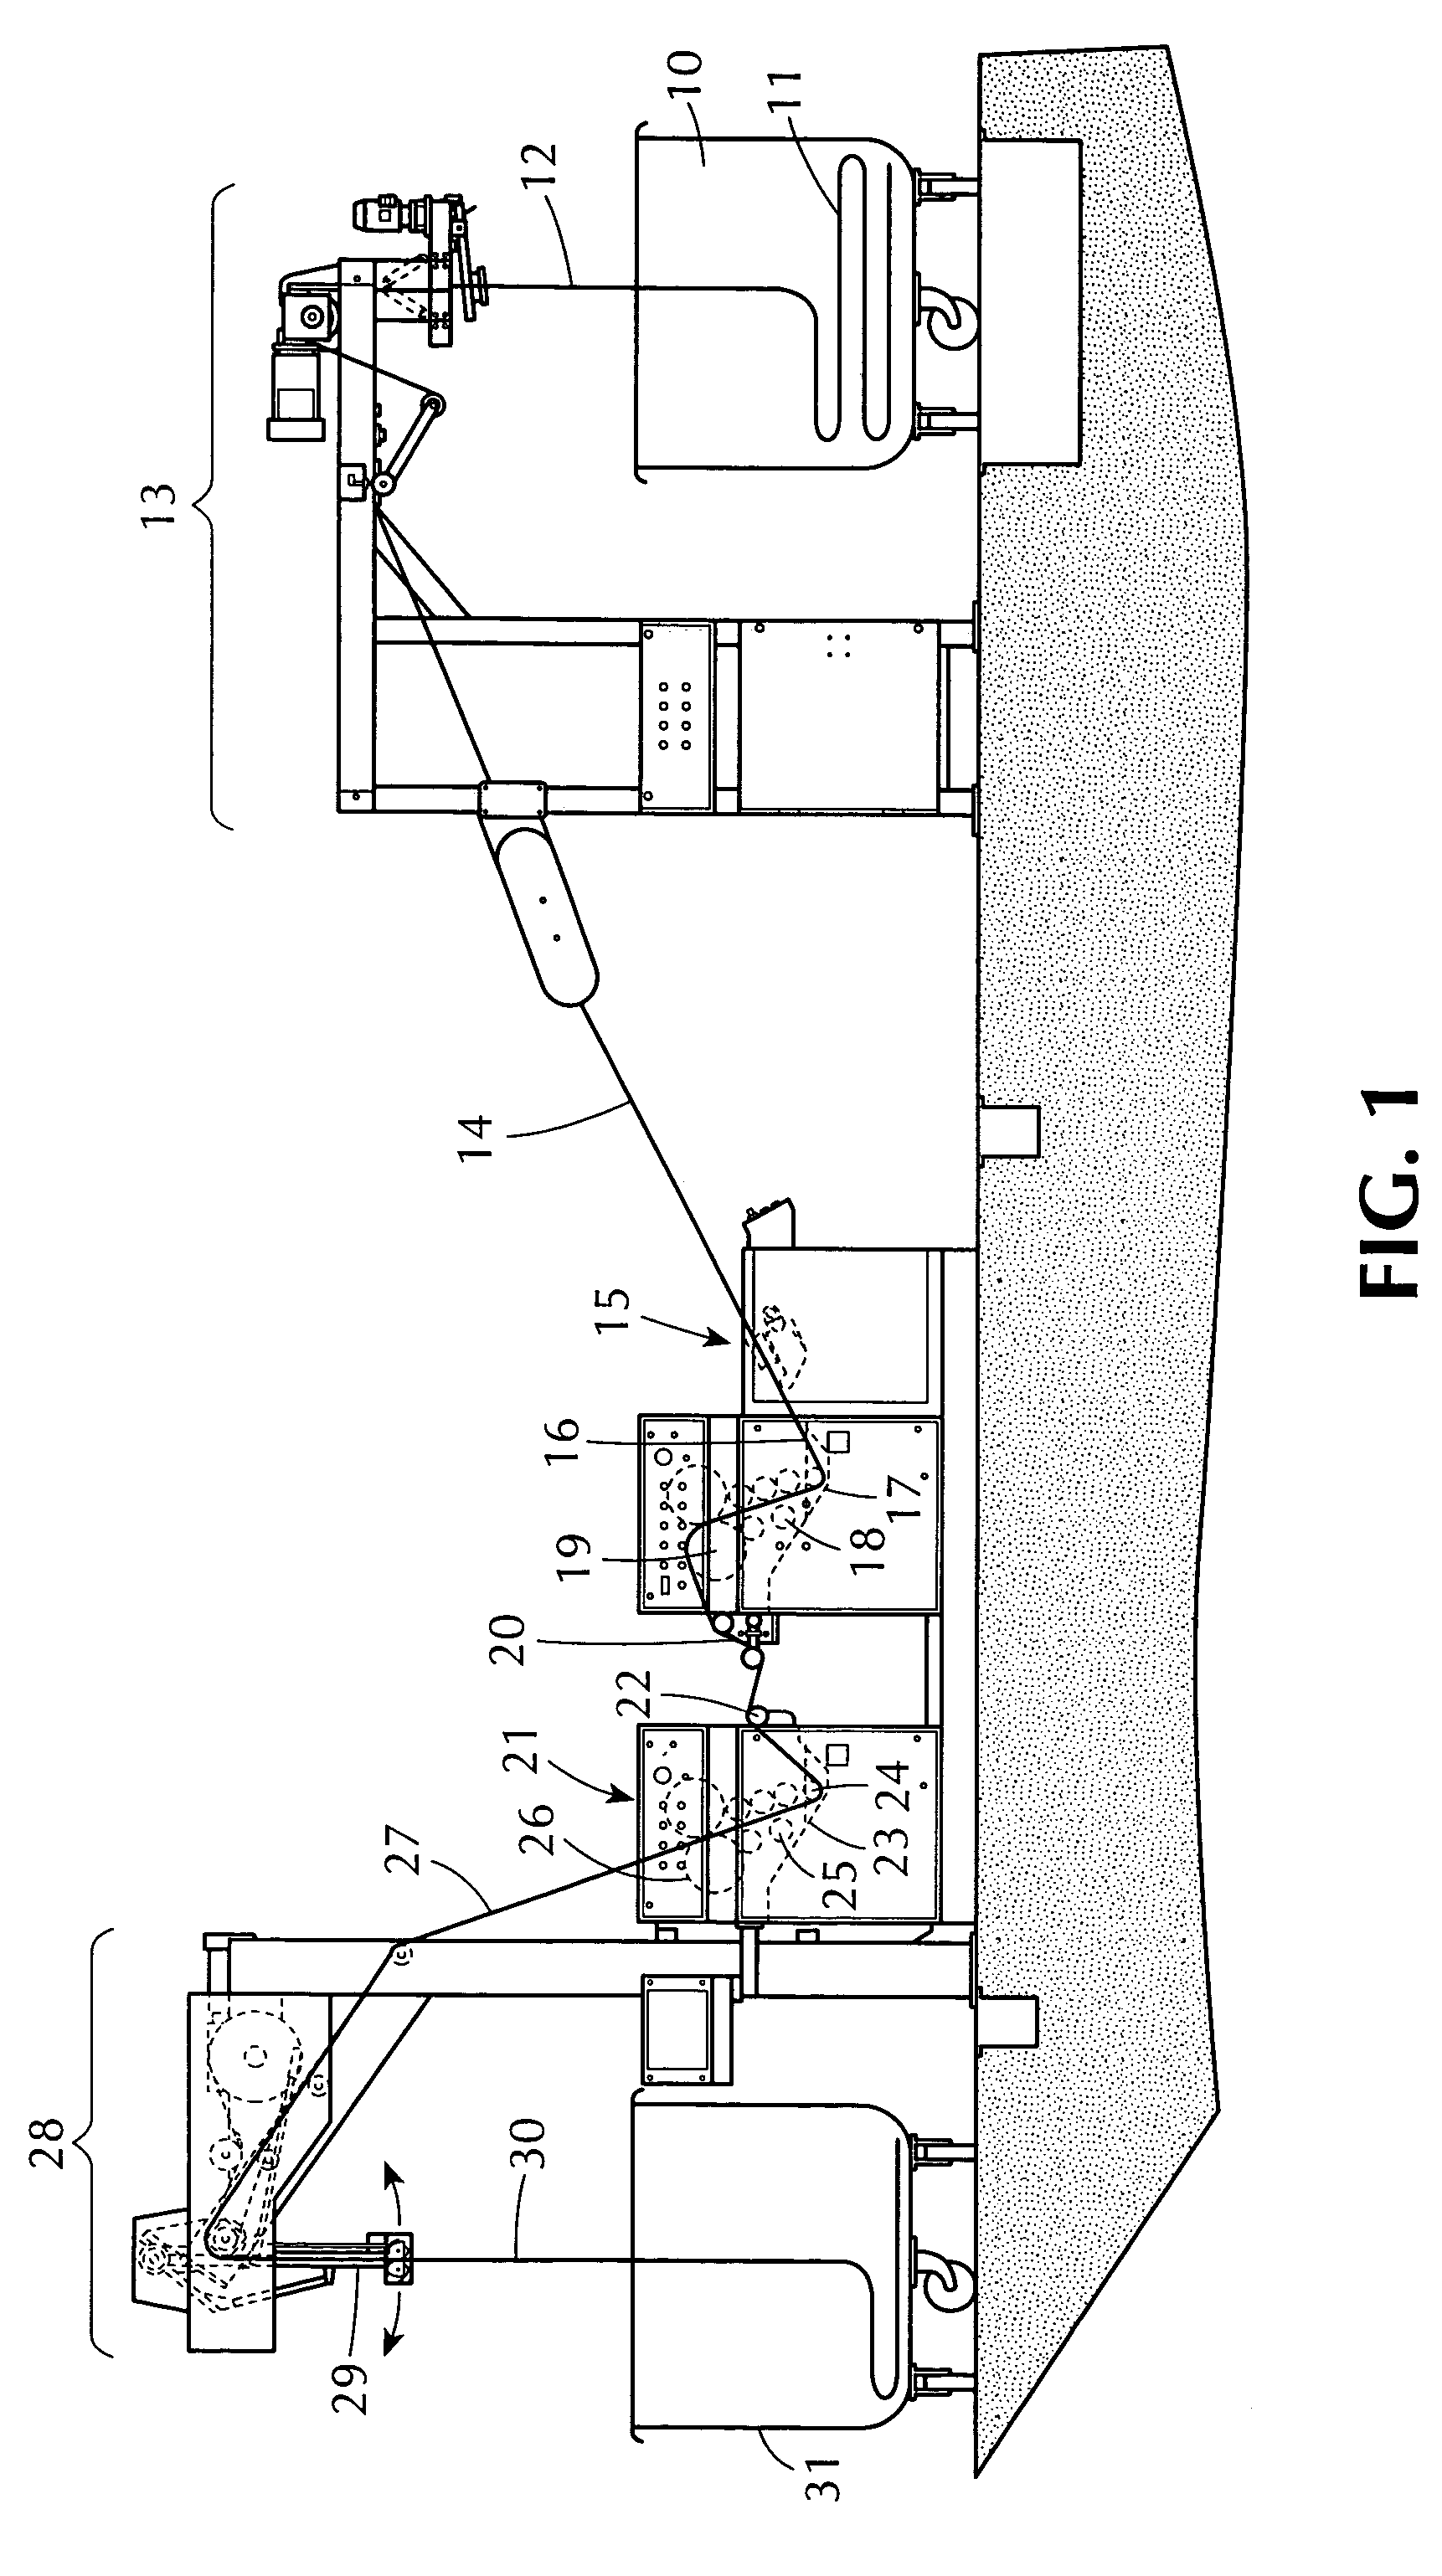 Method for controlling mixtures especially for fabric processing